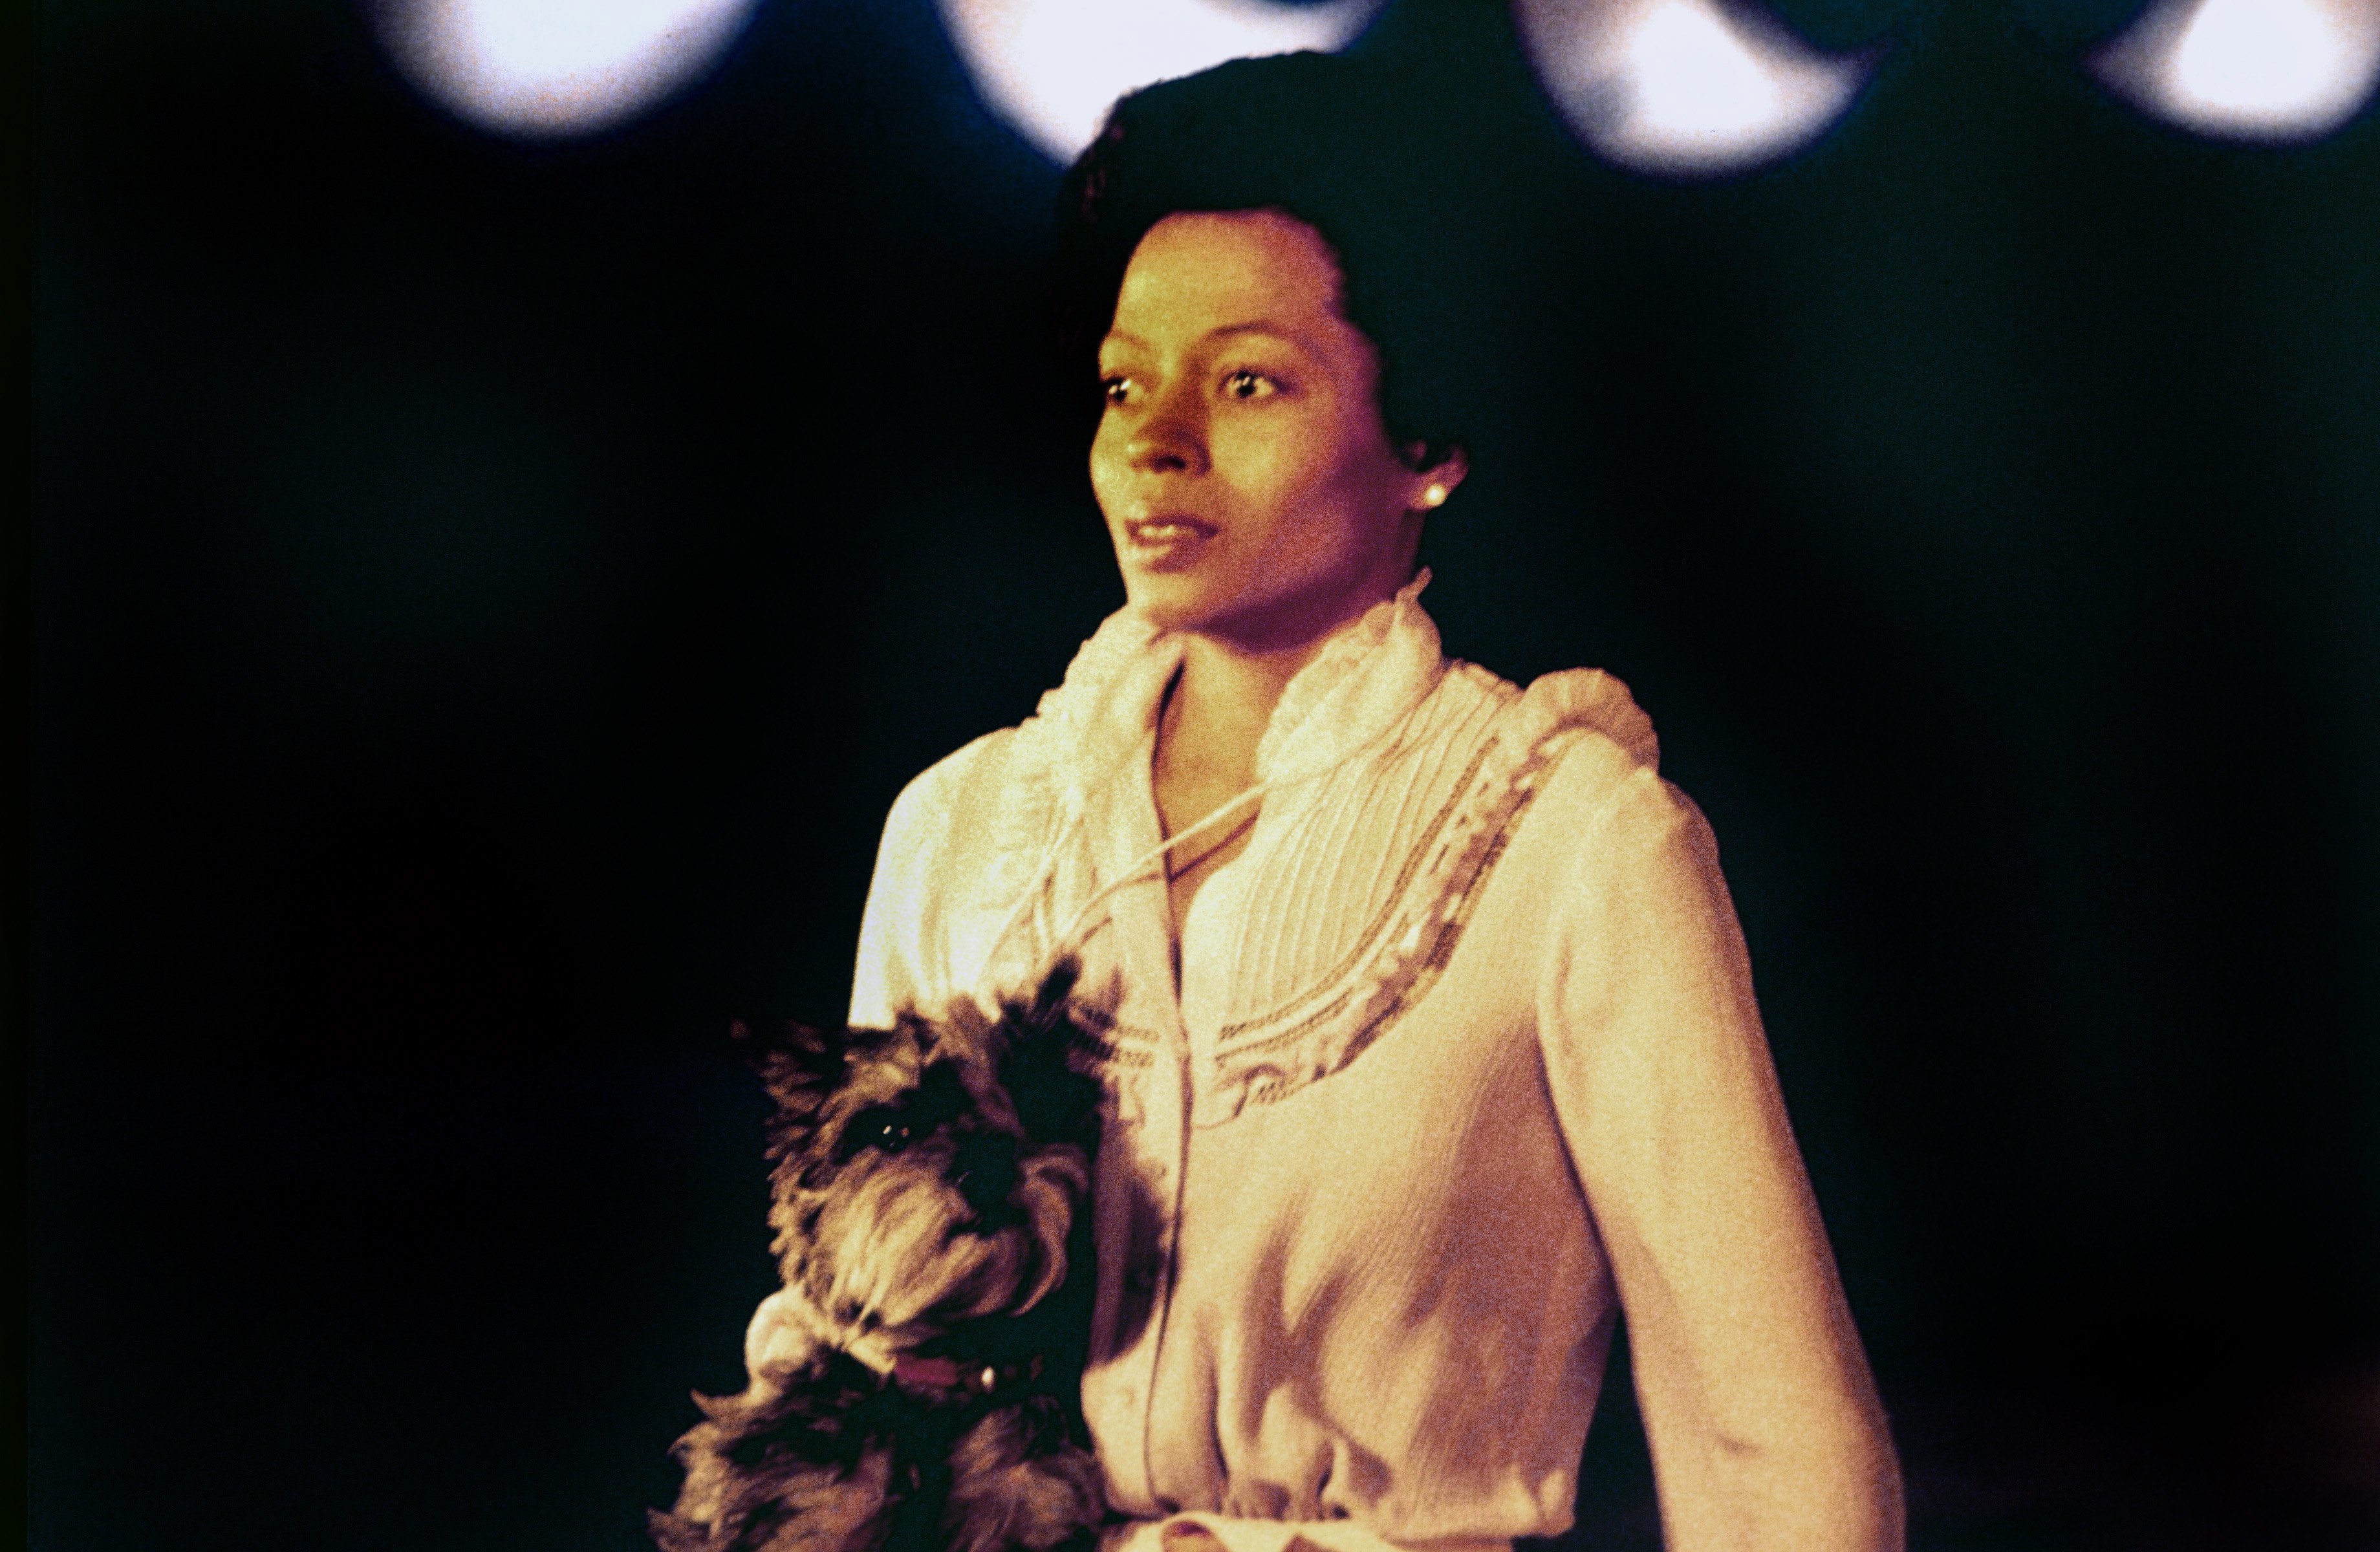 Diana Ross filming 'The Wiz' as Dorothy in the 1970s.